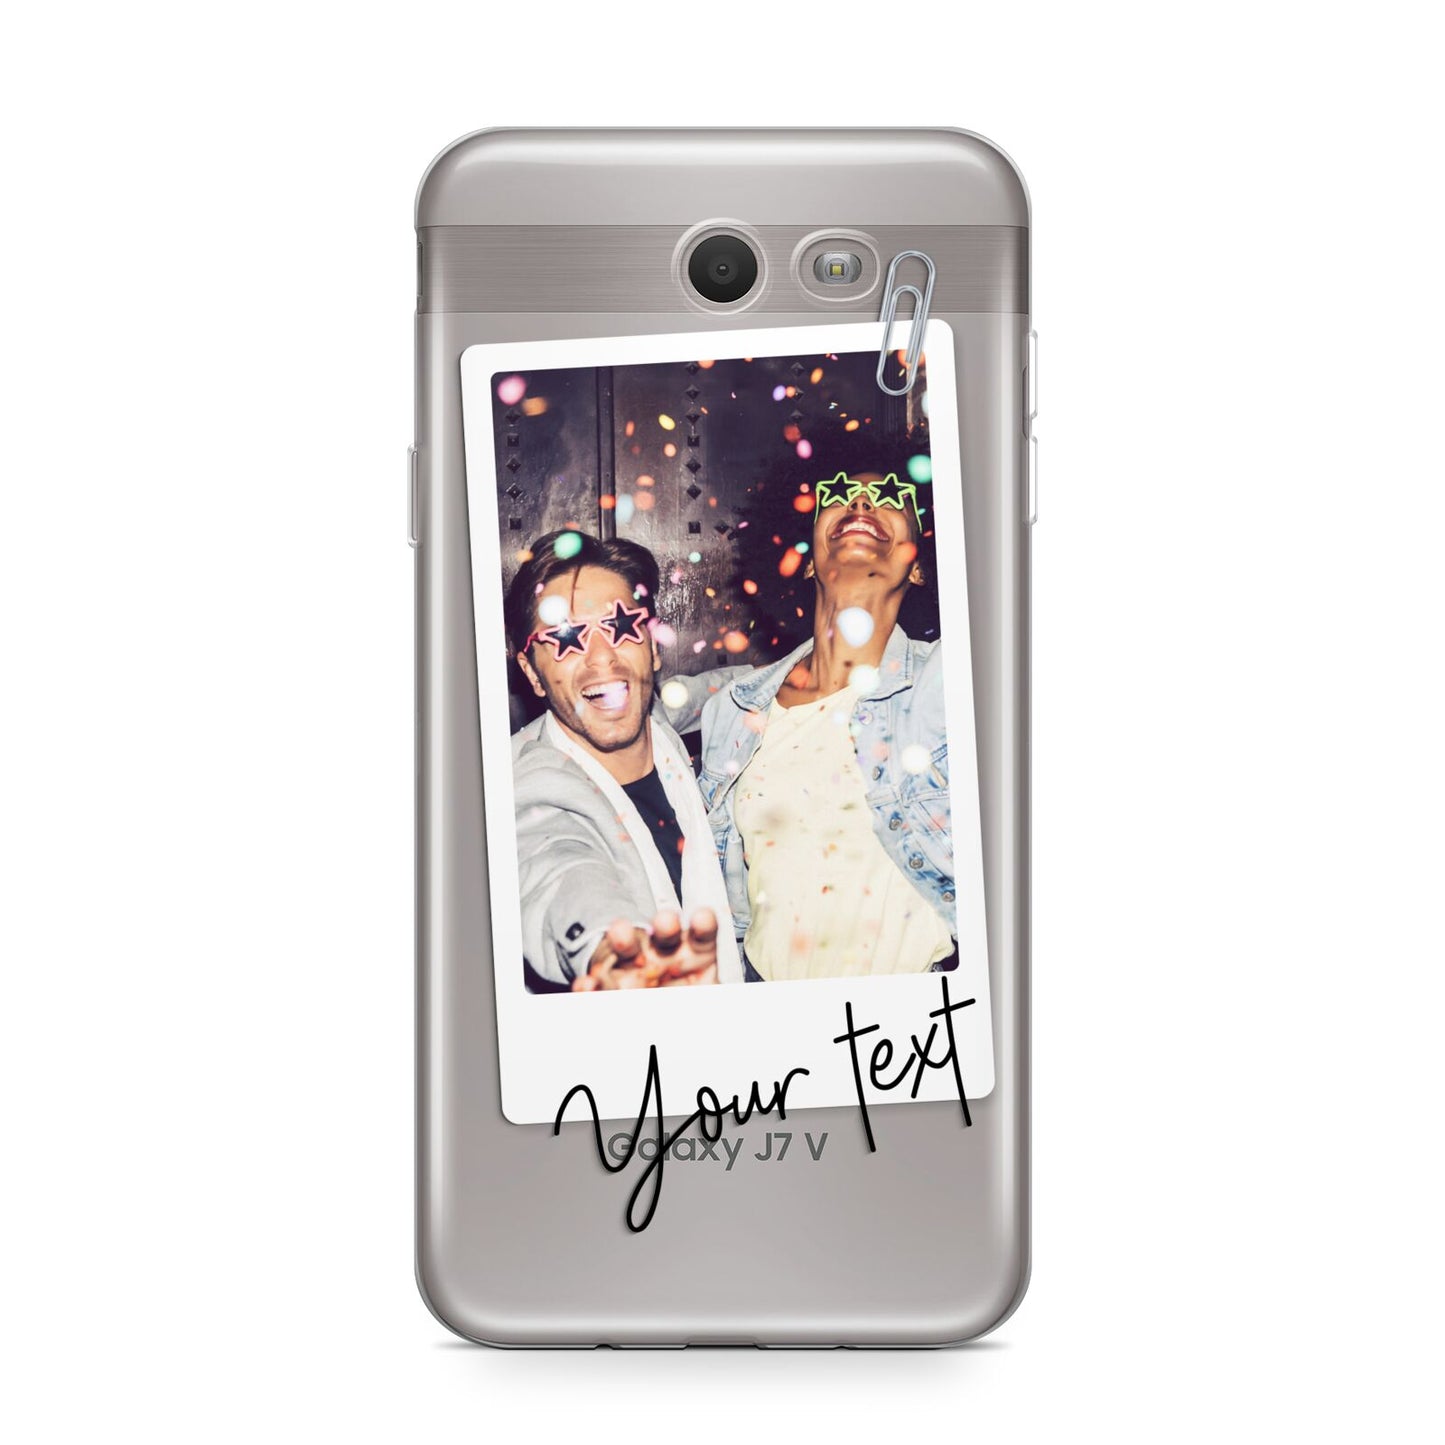 Personalised Photo with Text Samsung Galaxy J7 2017 Case